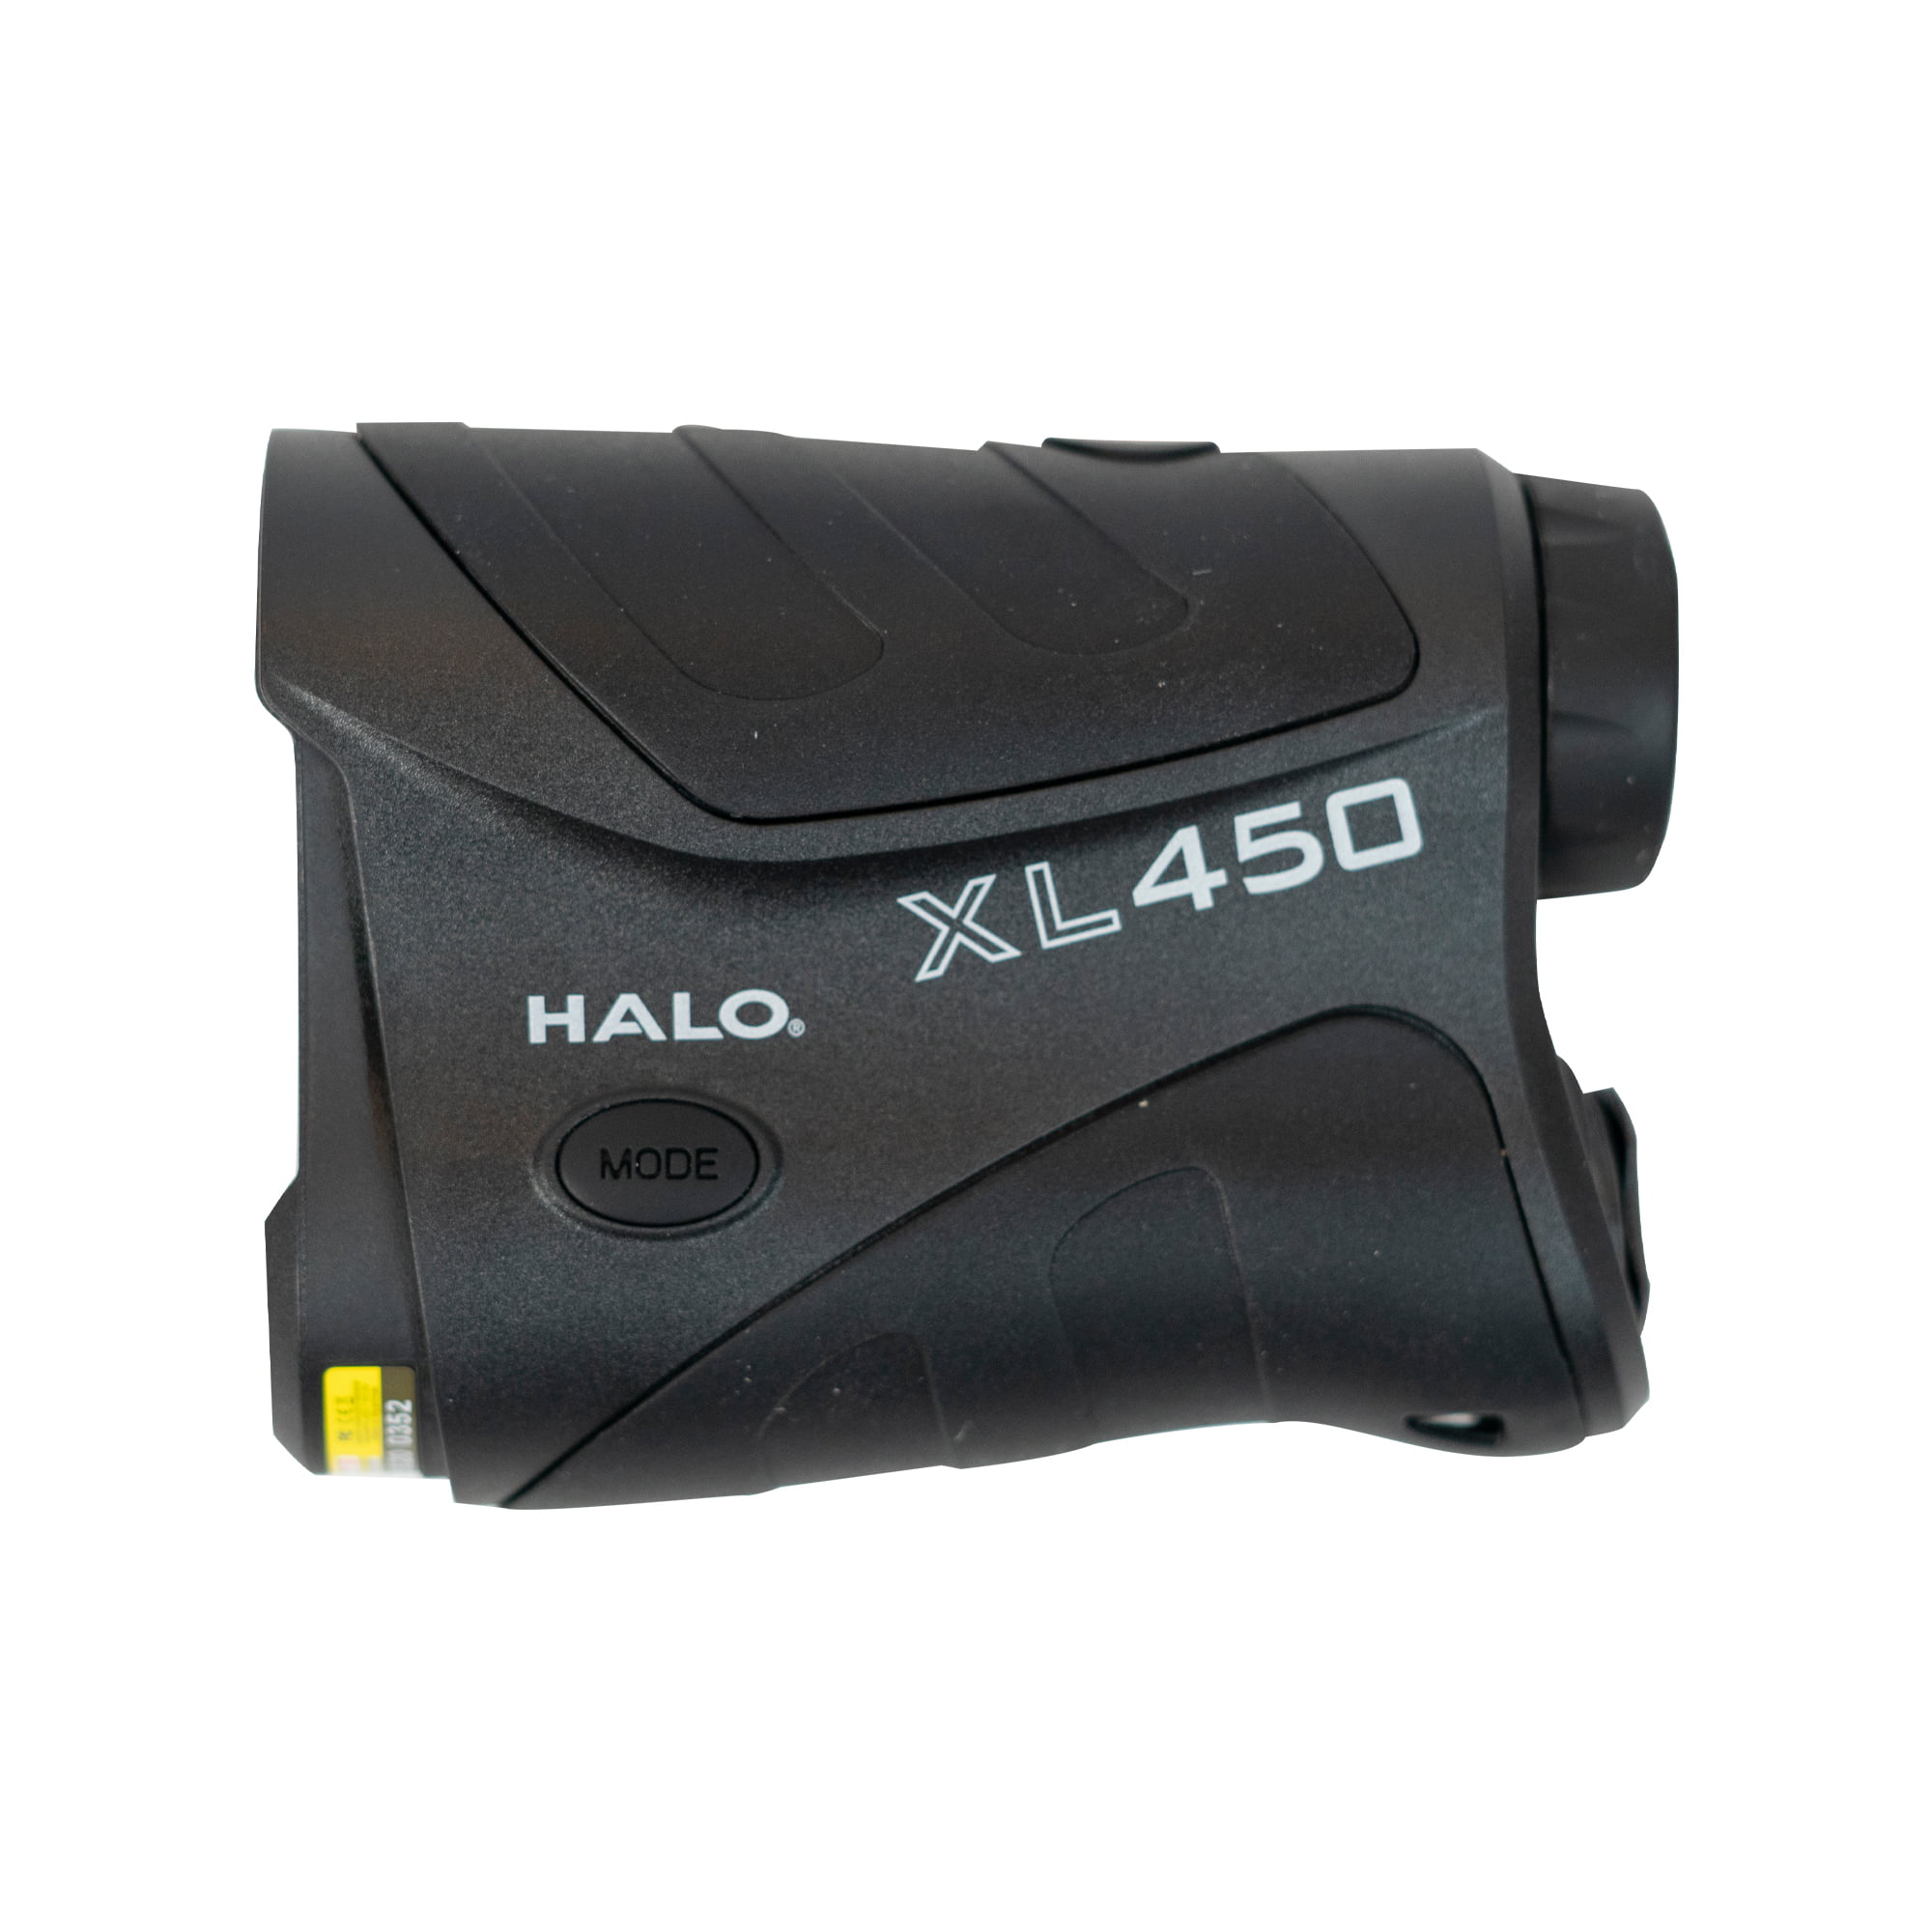 Halo Range Finder for Hunting, 6X Magnification, Angle Intelligence